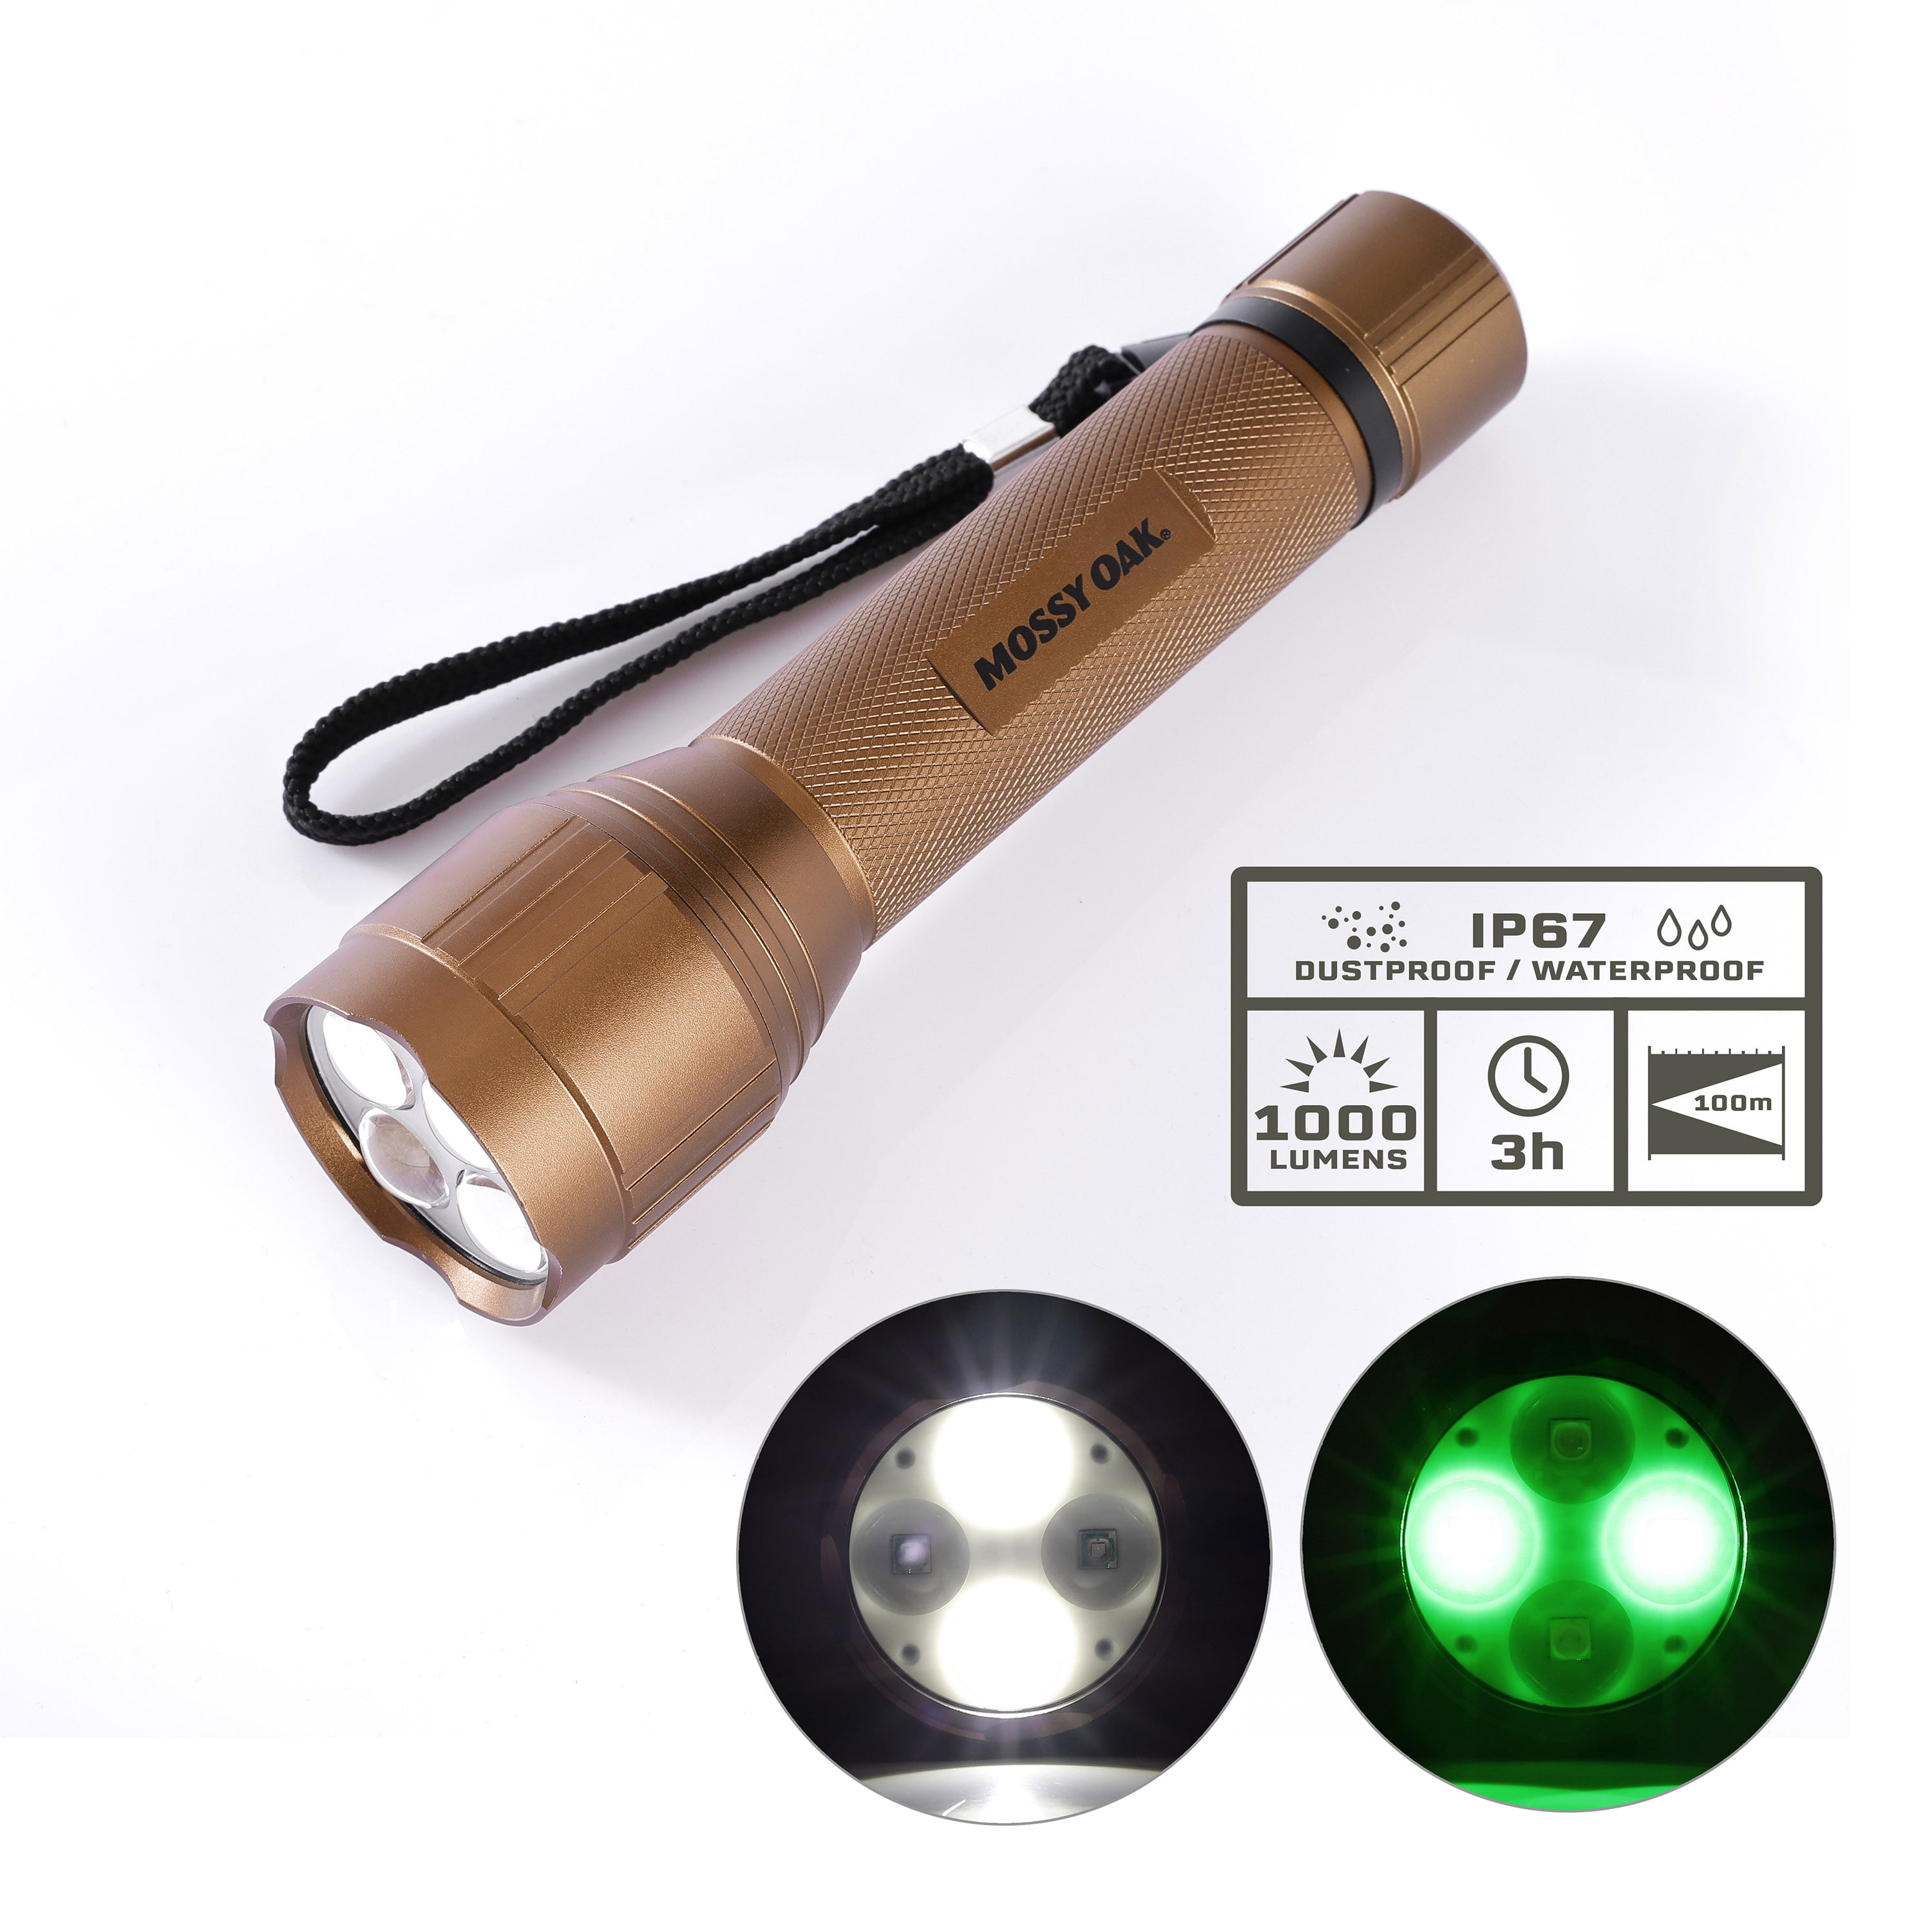 Good Quality 28 LED Aluminum Torch with Strap in Silver FREE POSTAGE UK STOCK 